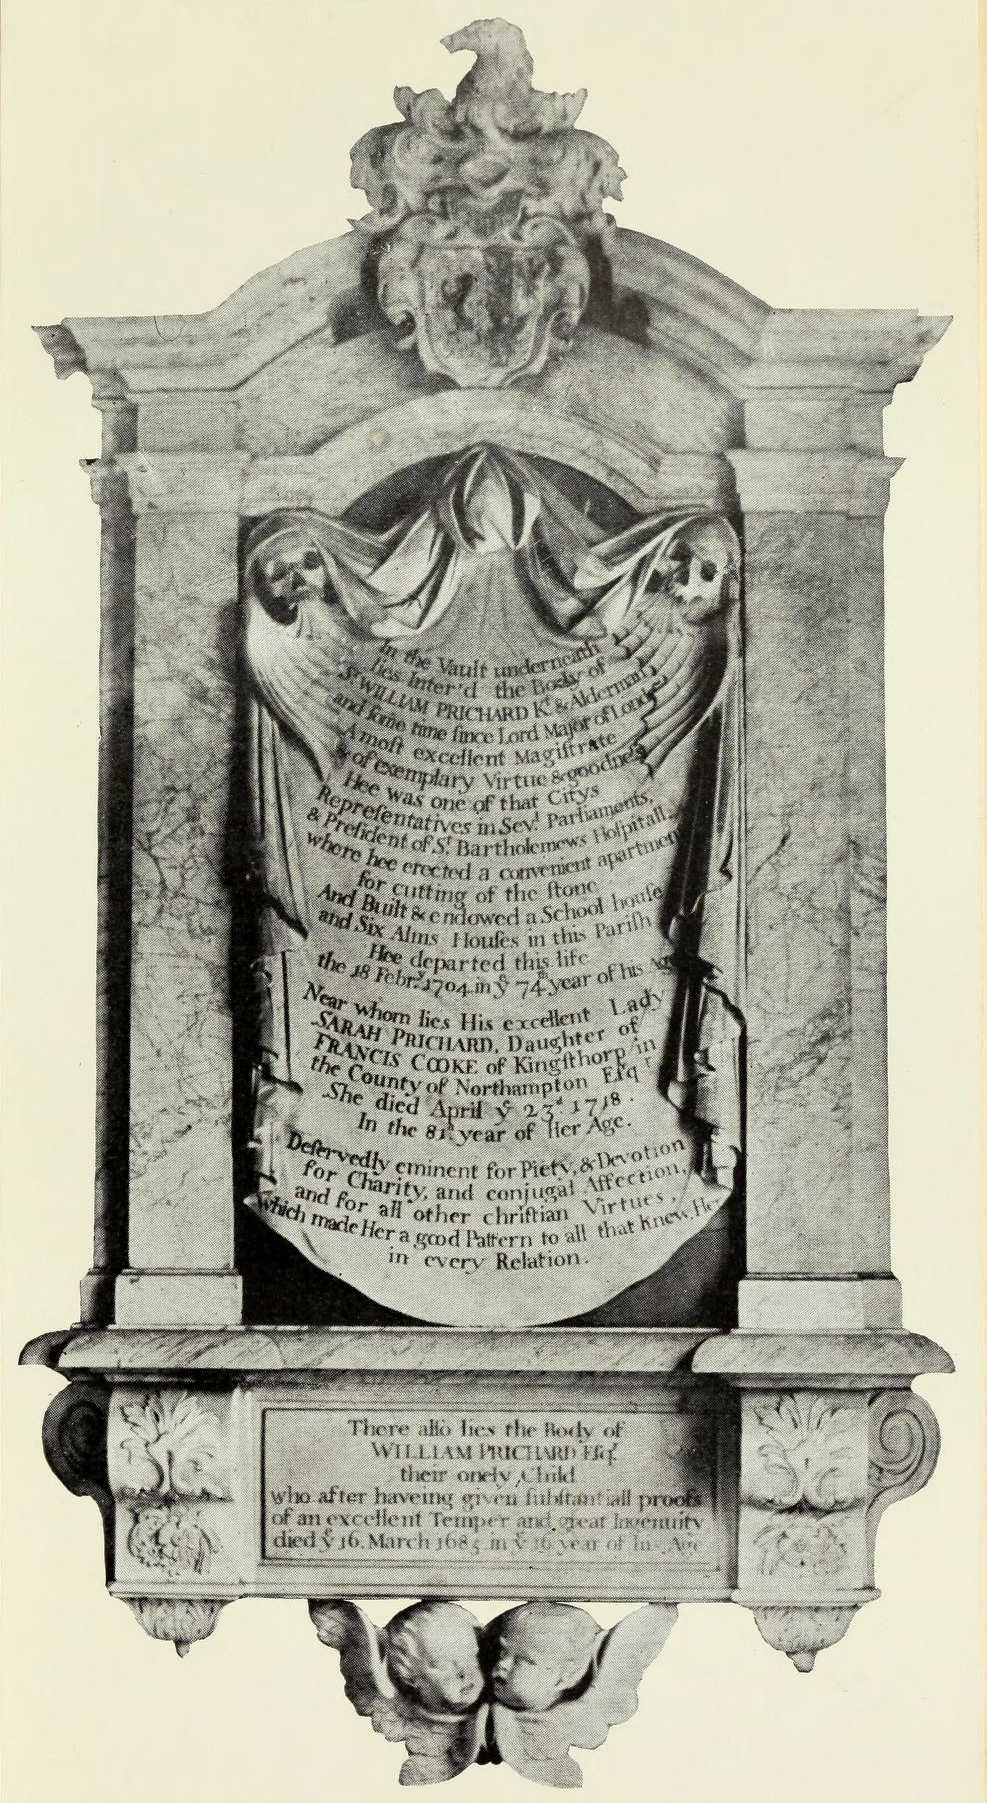 Monumental Inscription to Sir William Prichard and son in St. Andrew's Church, Great Linford